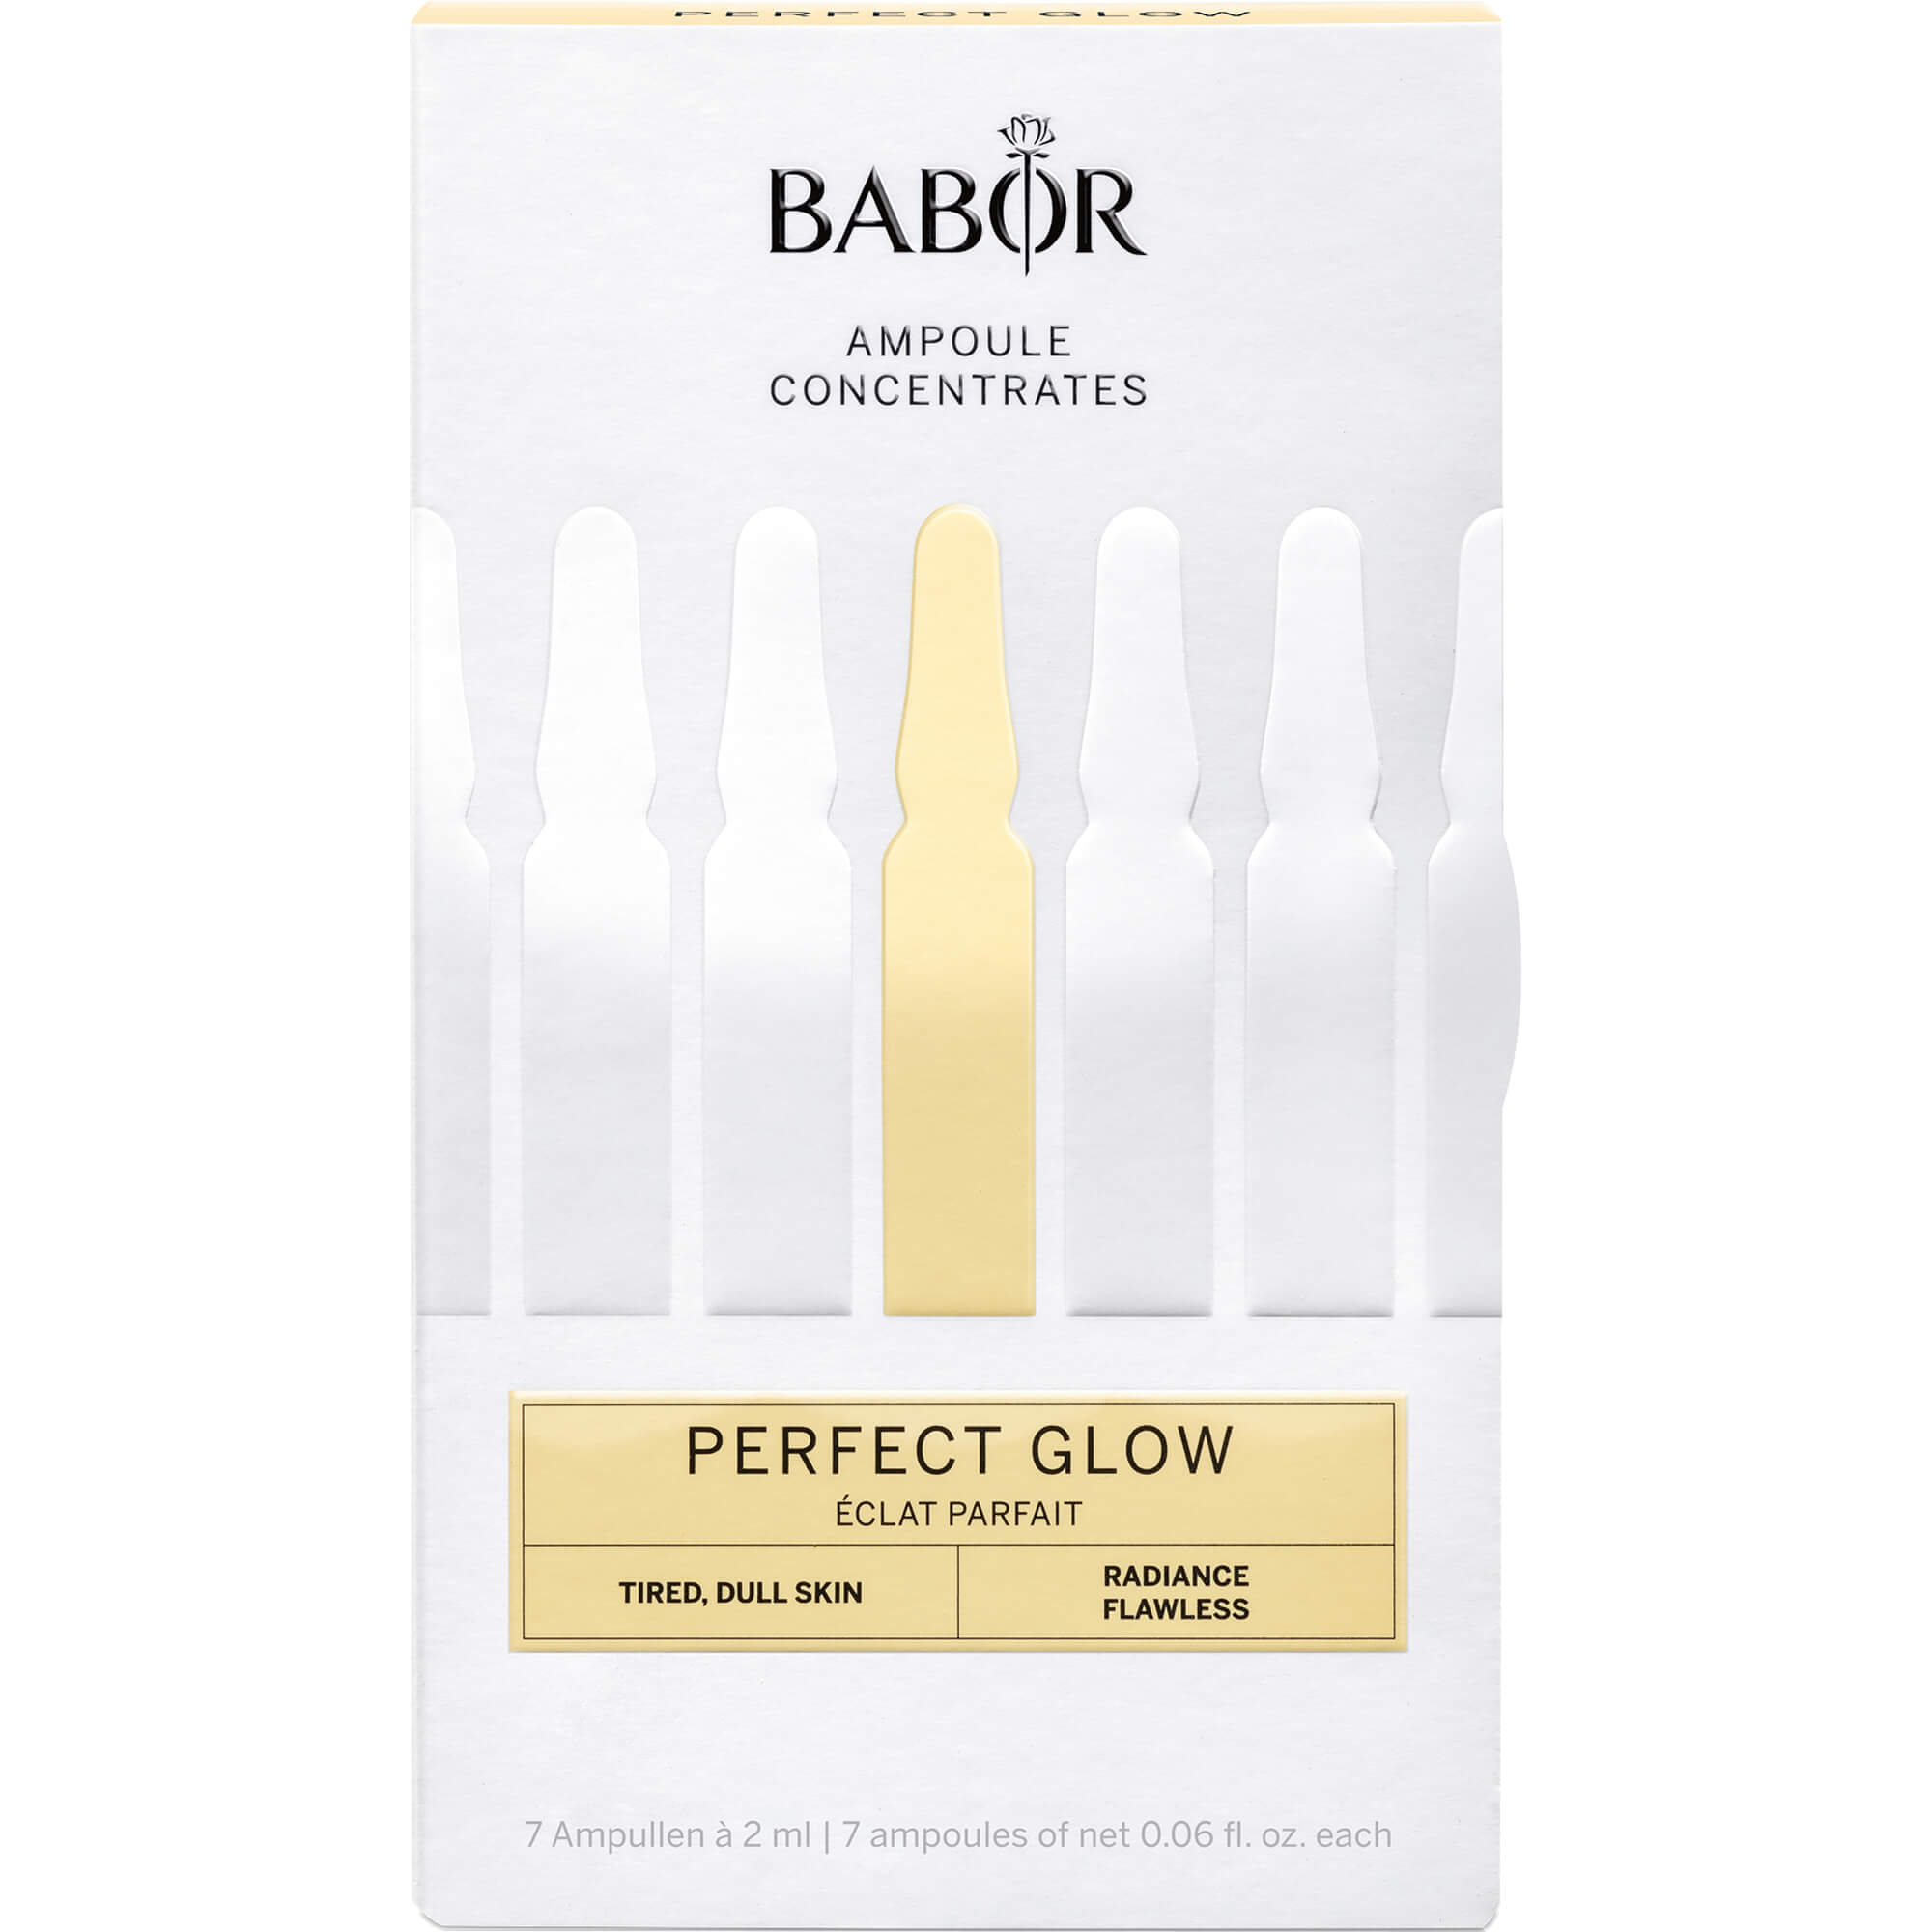 BABOR AMP.CONCENTR.Perfect Glow